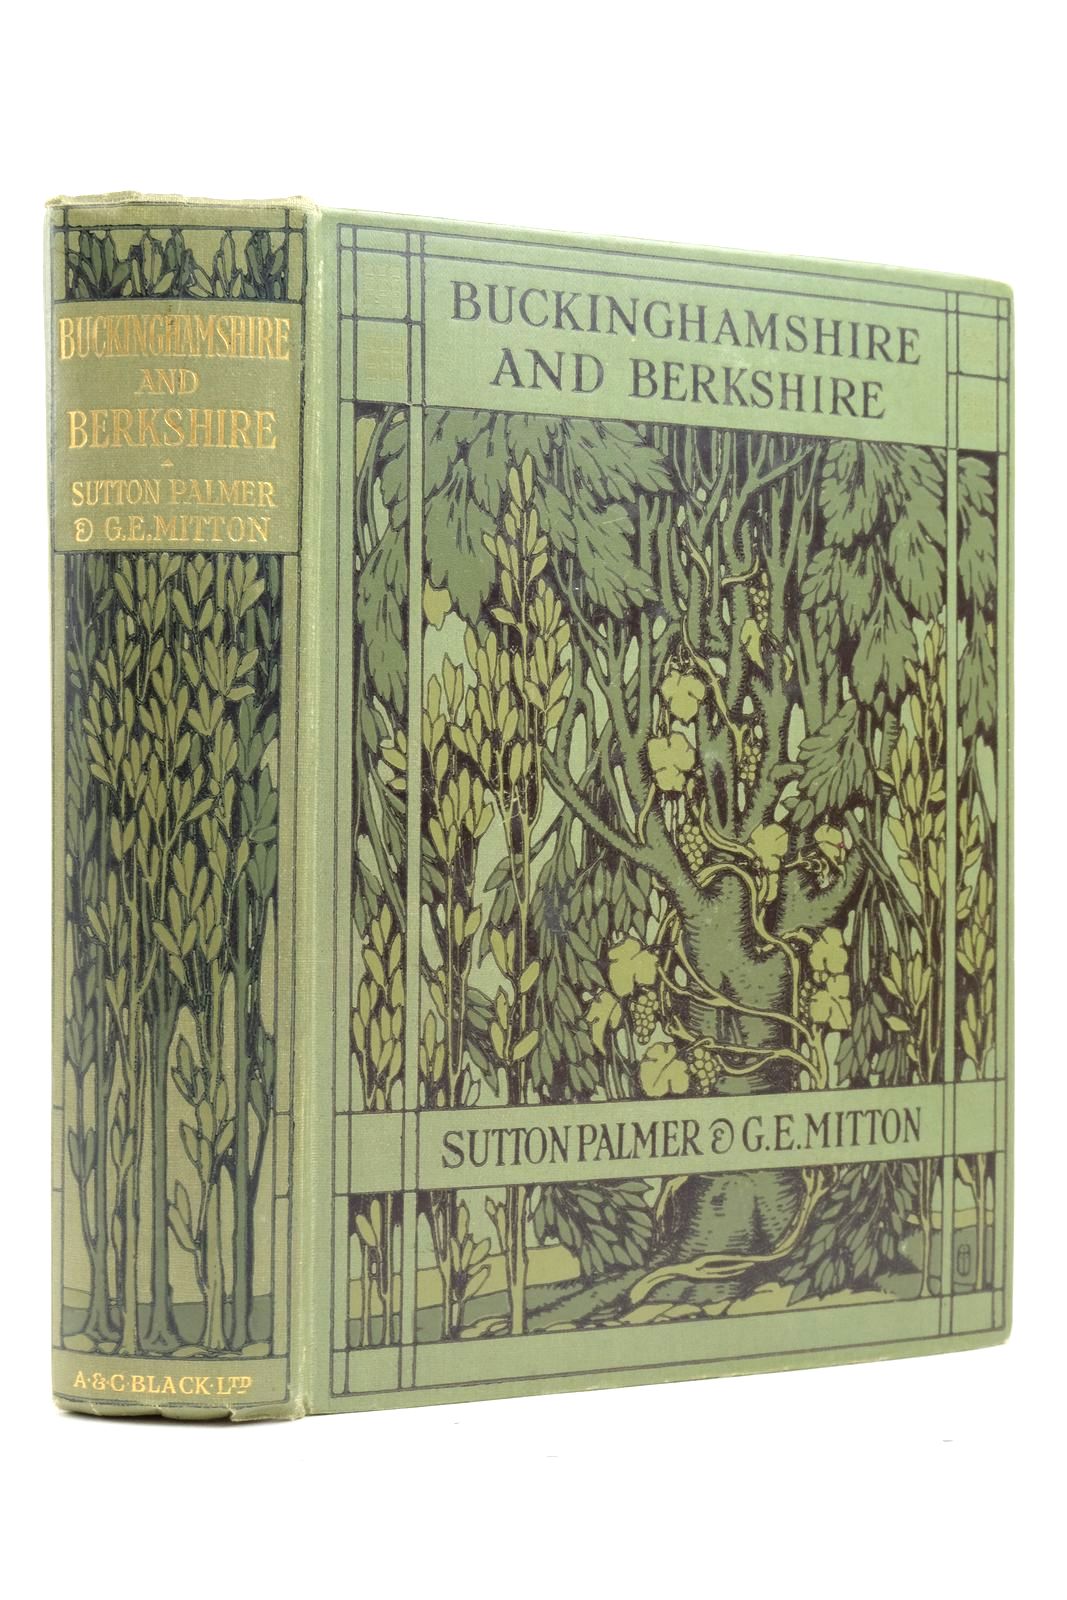 Photo of BUCKINGHAMSHIRE AND BERKSHIRE written by Mitton, G.E. illustrated by Palmer, Sutton published by A. & C. Black Ltd. (STOCK CODE: 2137603)  for sale by Stella & Rose's Books